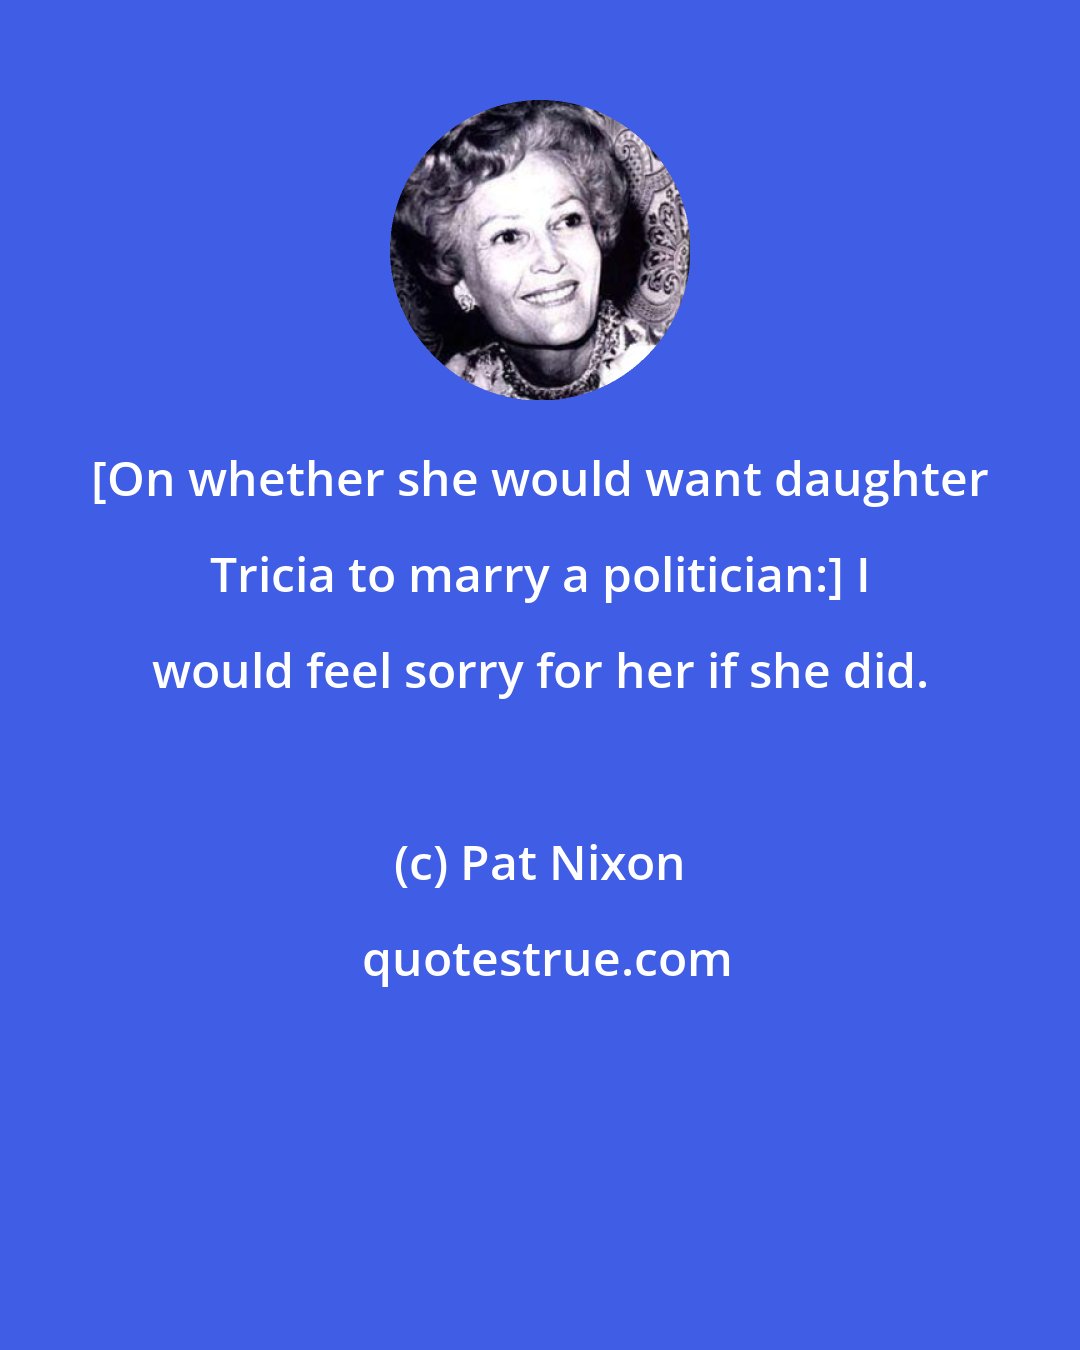 Pat Nixon: [On whether she would want daughter Tricia to marry a politician:] I would feel sorry for her if she did.